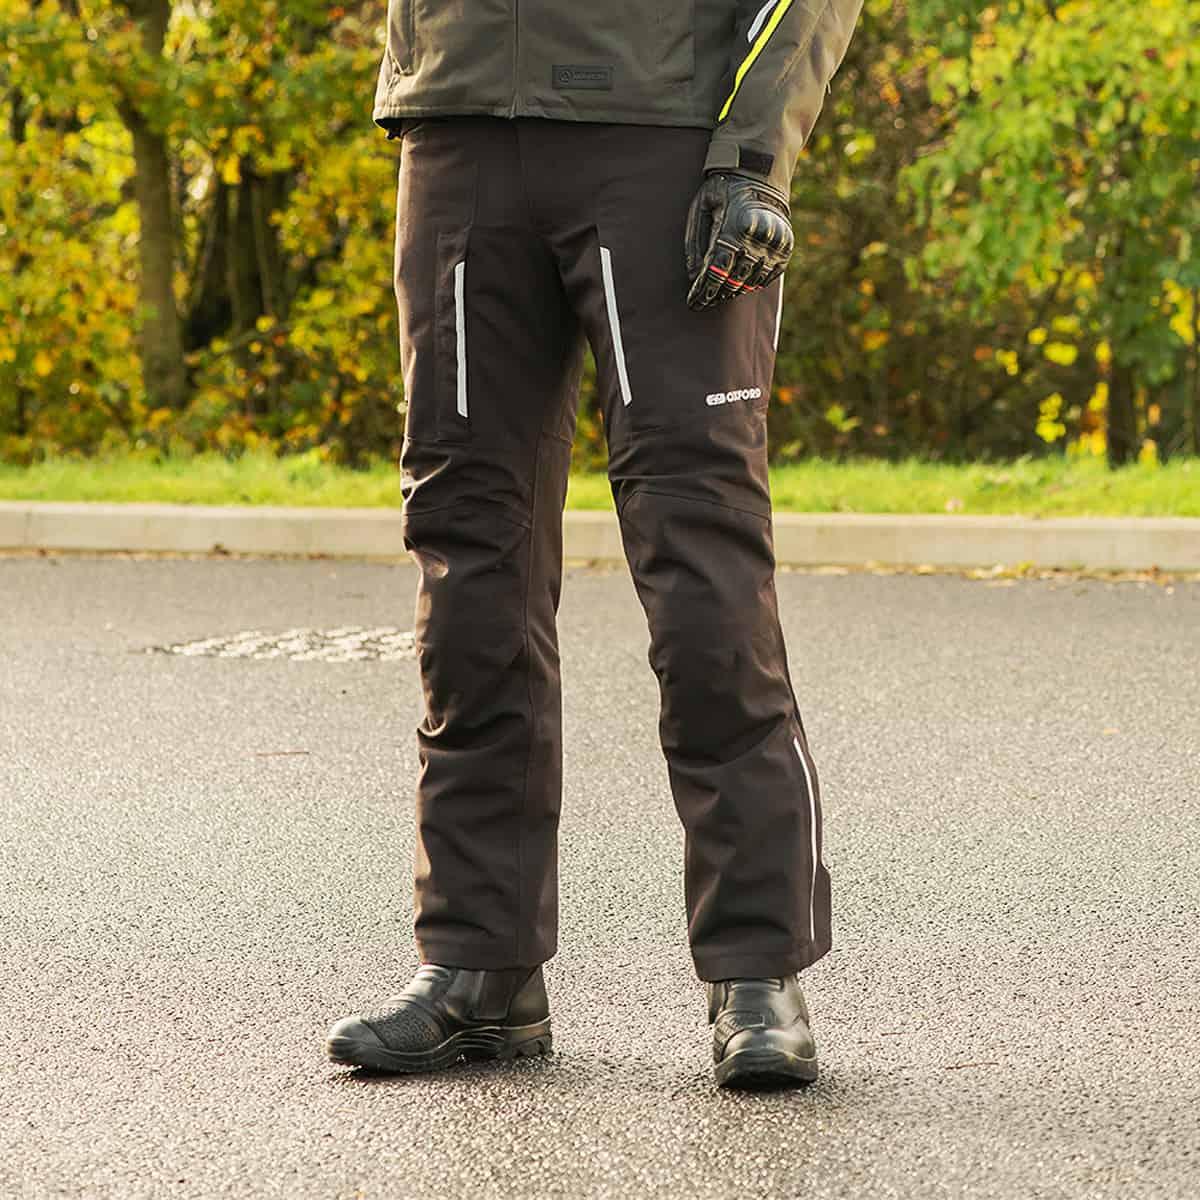 Oxford Hinterland Advanced Trousers WP Regular - Black - Browse our range of Clothing: Trousers - getgearedshop 